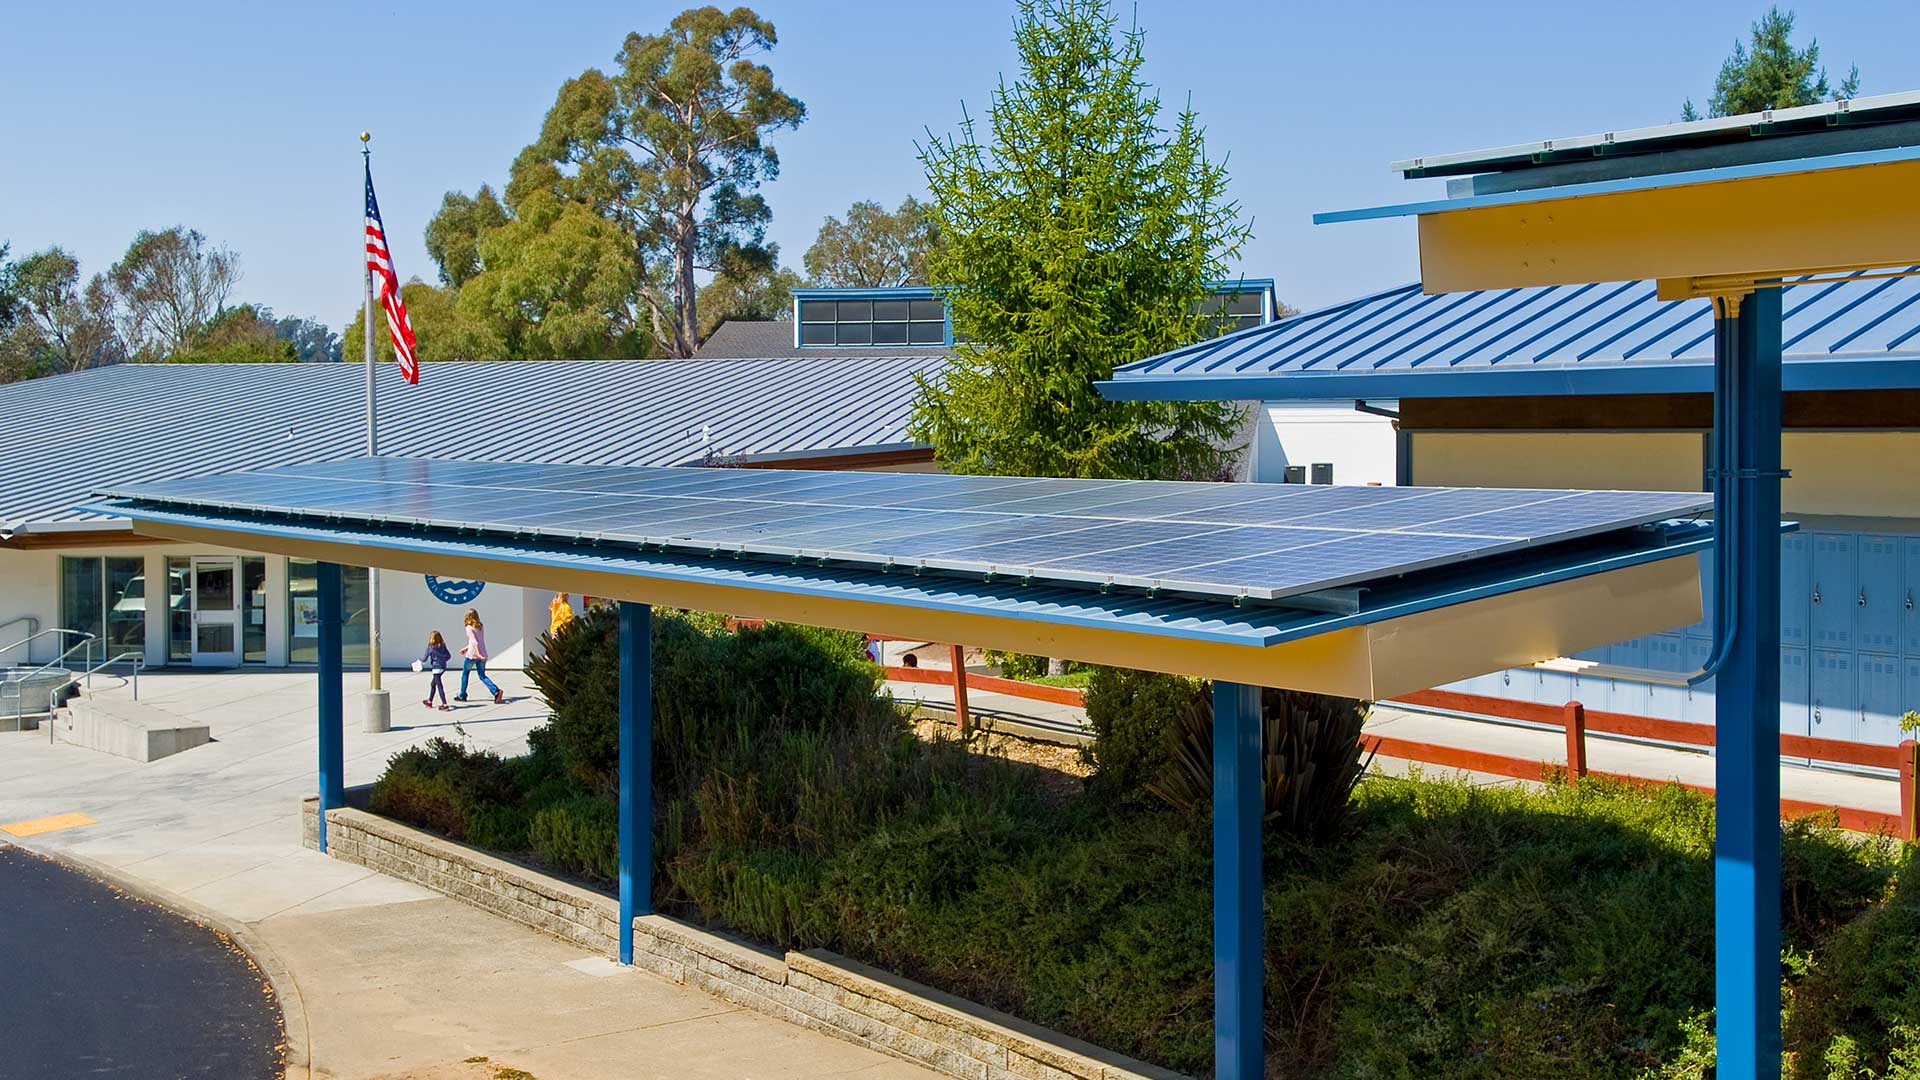 Covered walkways in parking area with solar panels extending along the roof. School campus behind.